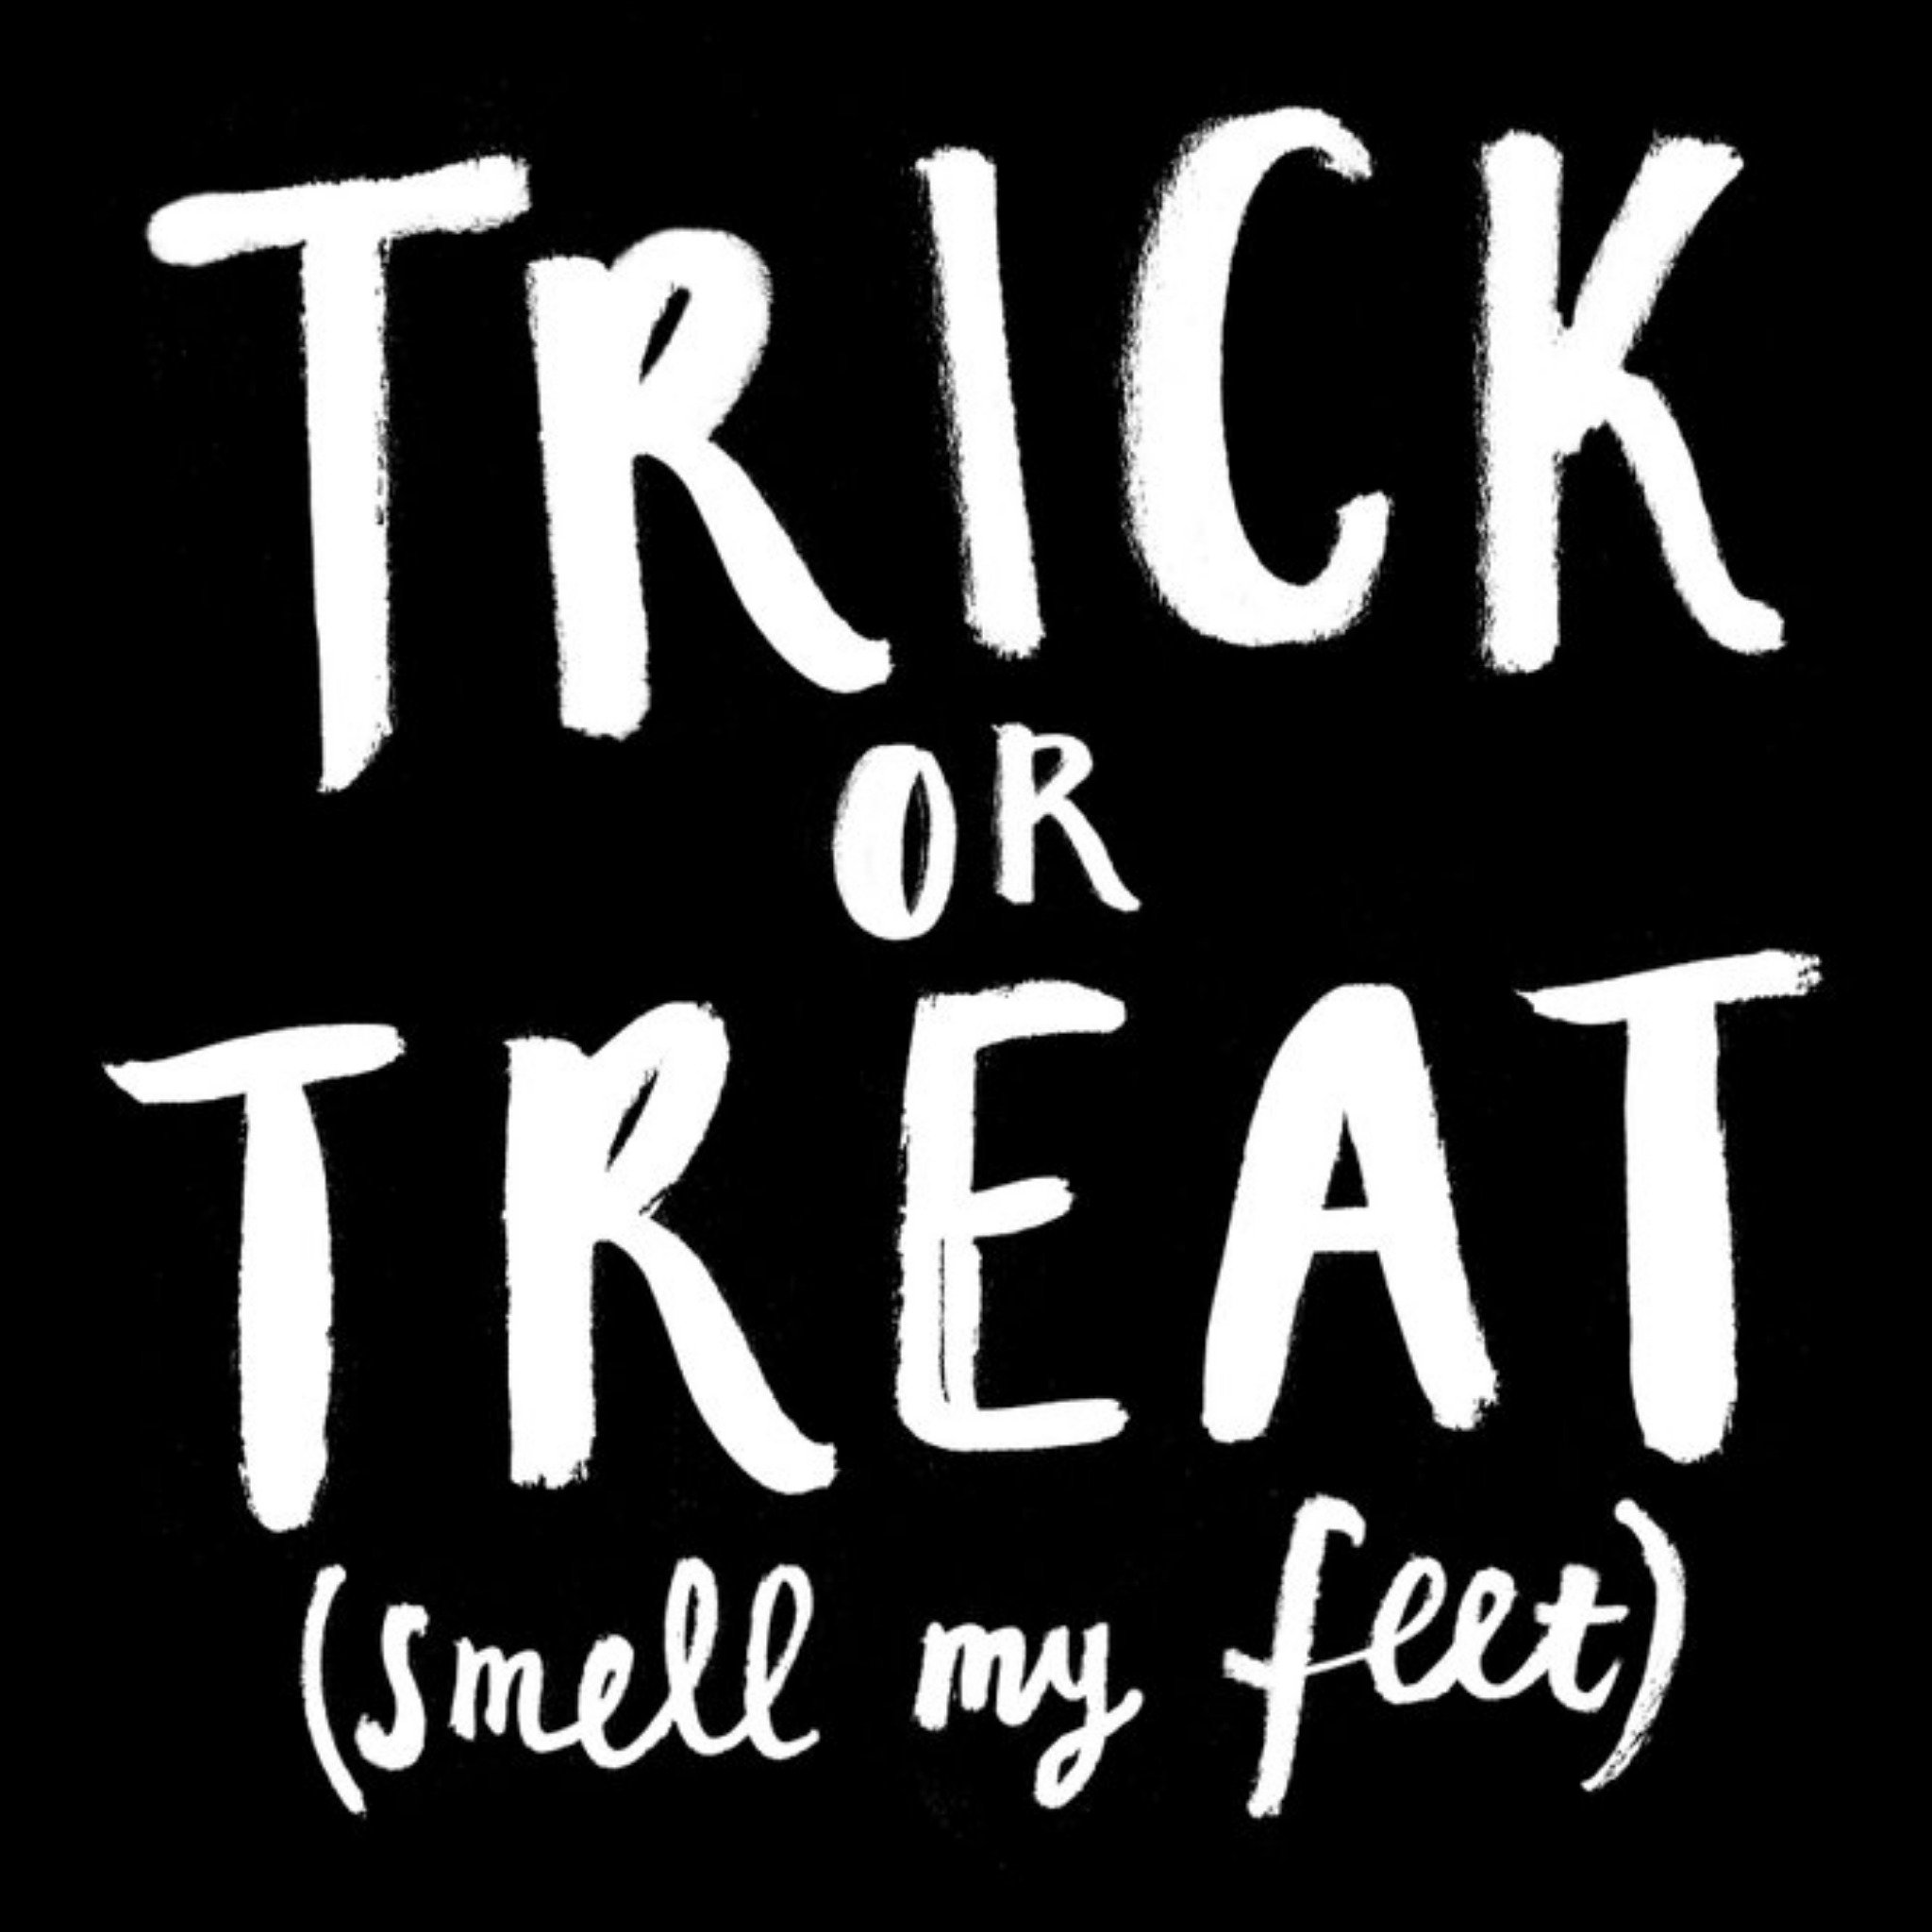 Moonpig Trick Or Treat (Smell My Feet) Funny Halloween Card, Large